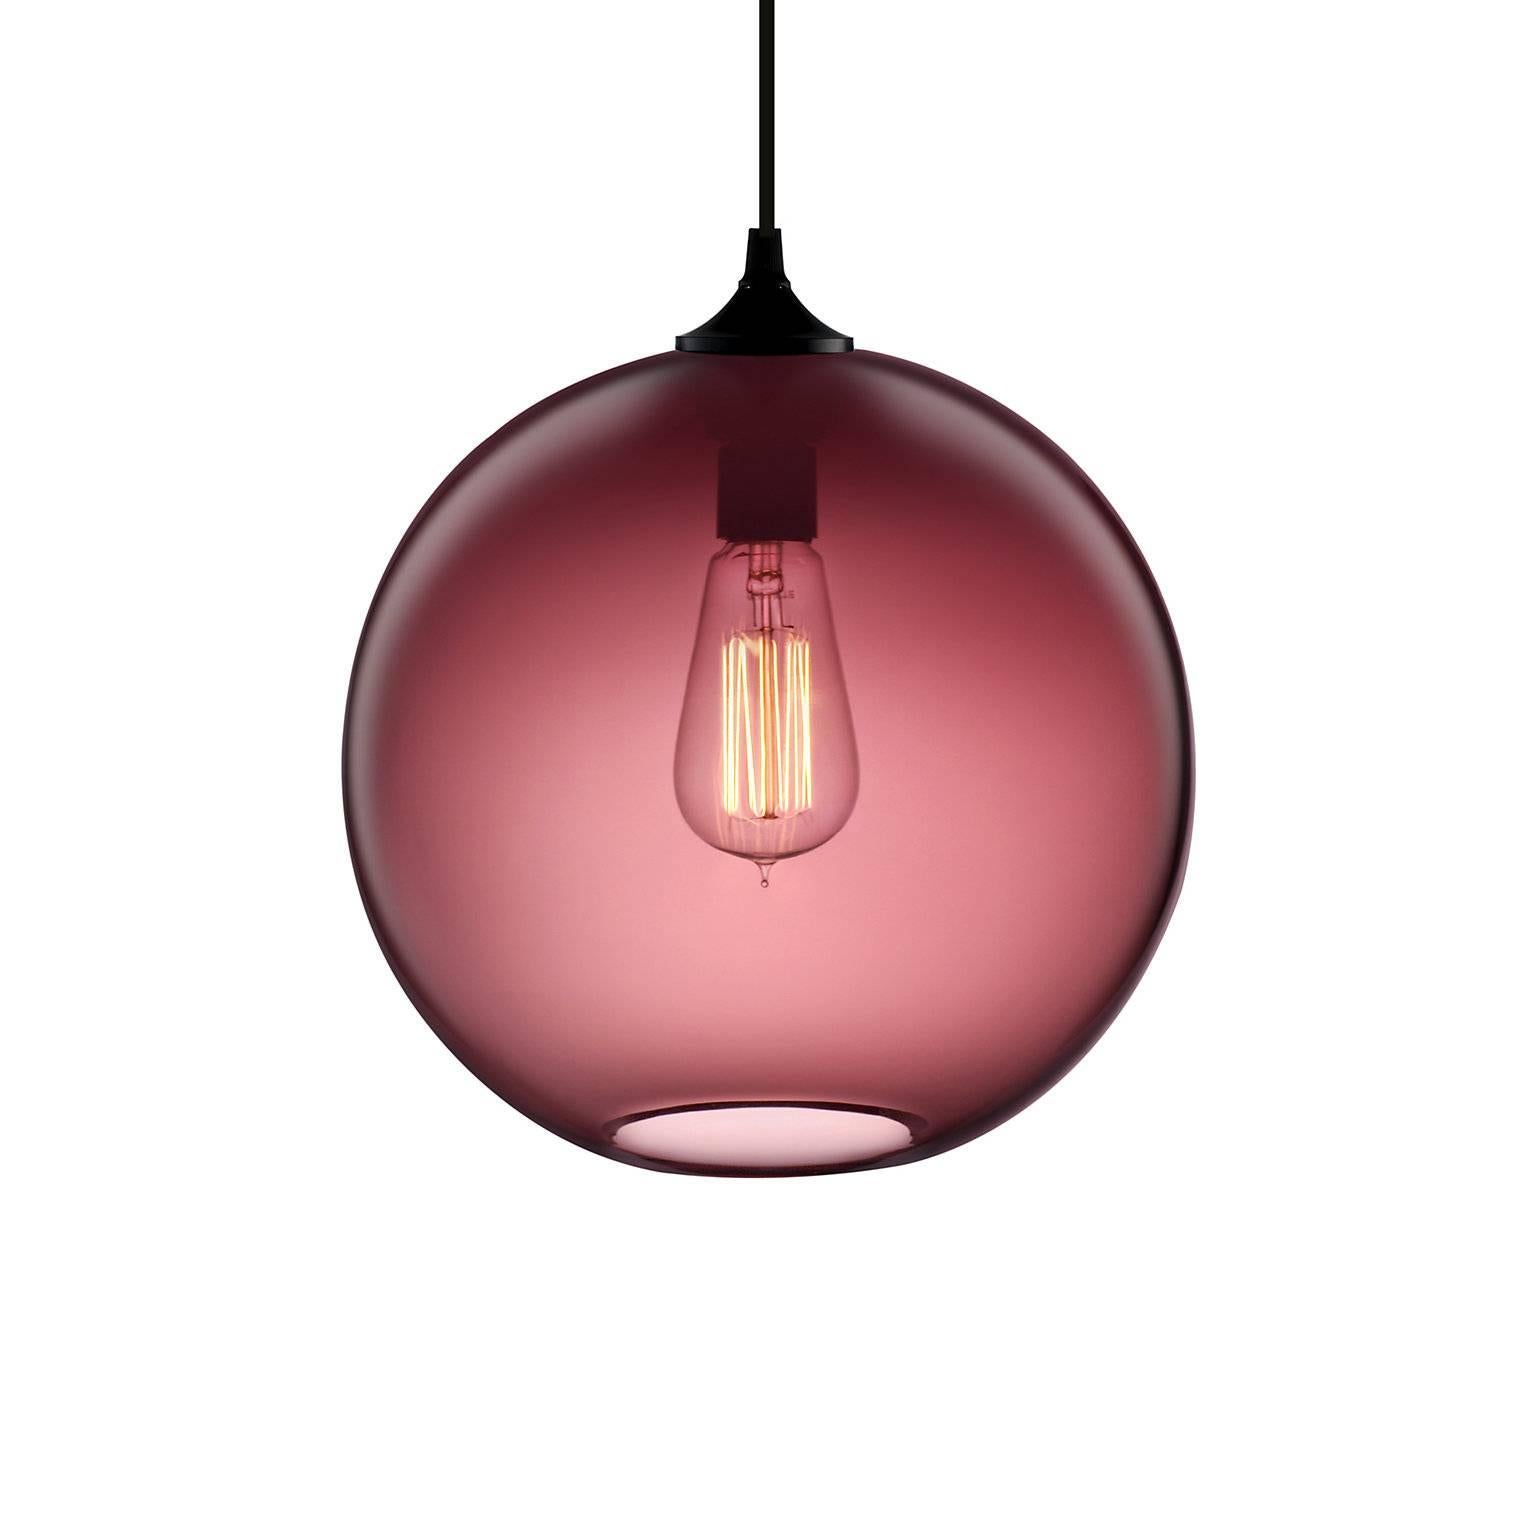 American Solitaire Smoke Handblown Modern Glass Pendant Light, Made in the USA For Sale